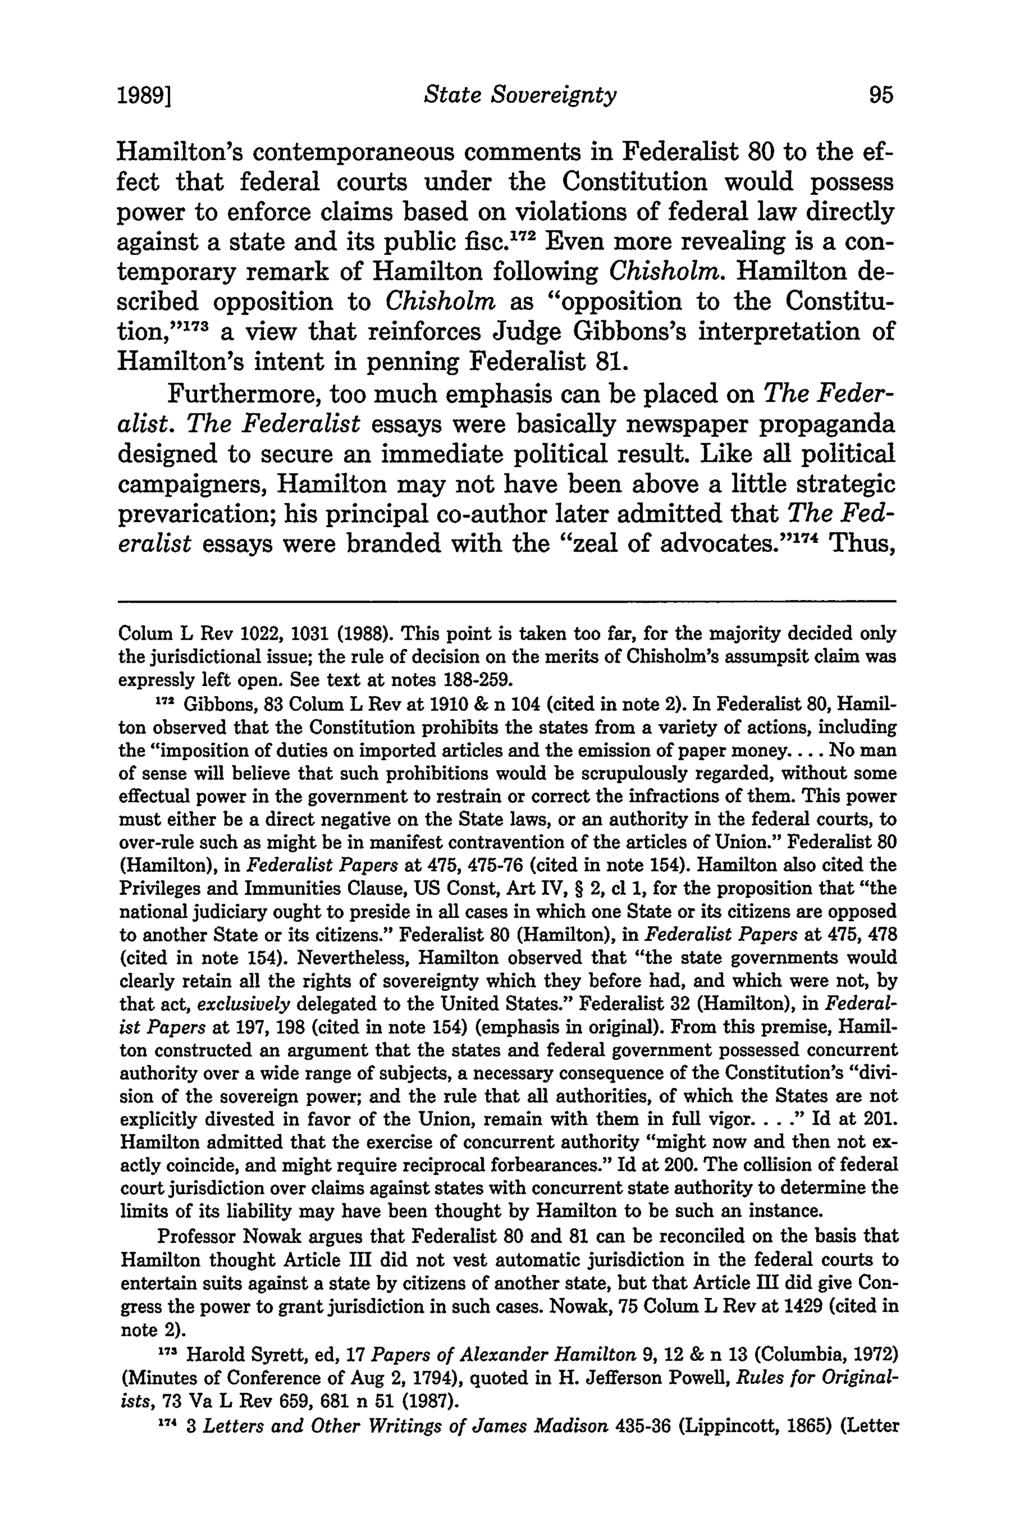 1989] State Sovereignty t Hamilton's contemporaneous comments in Federalist 80 to the effect that federal courts under the Constitution would possess power to enforce claims based on violations of